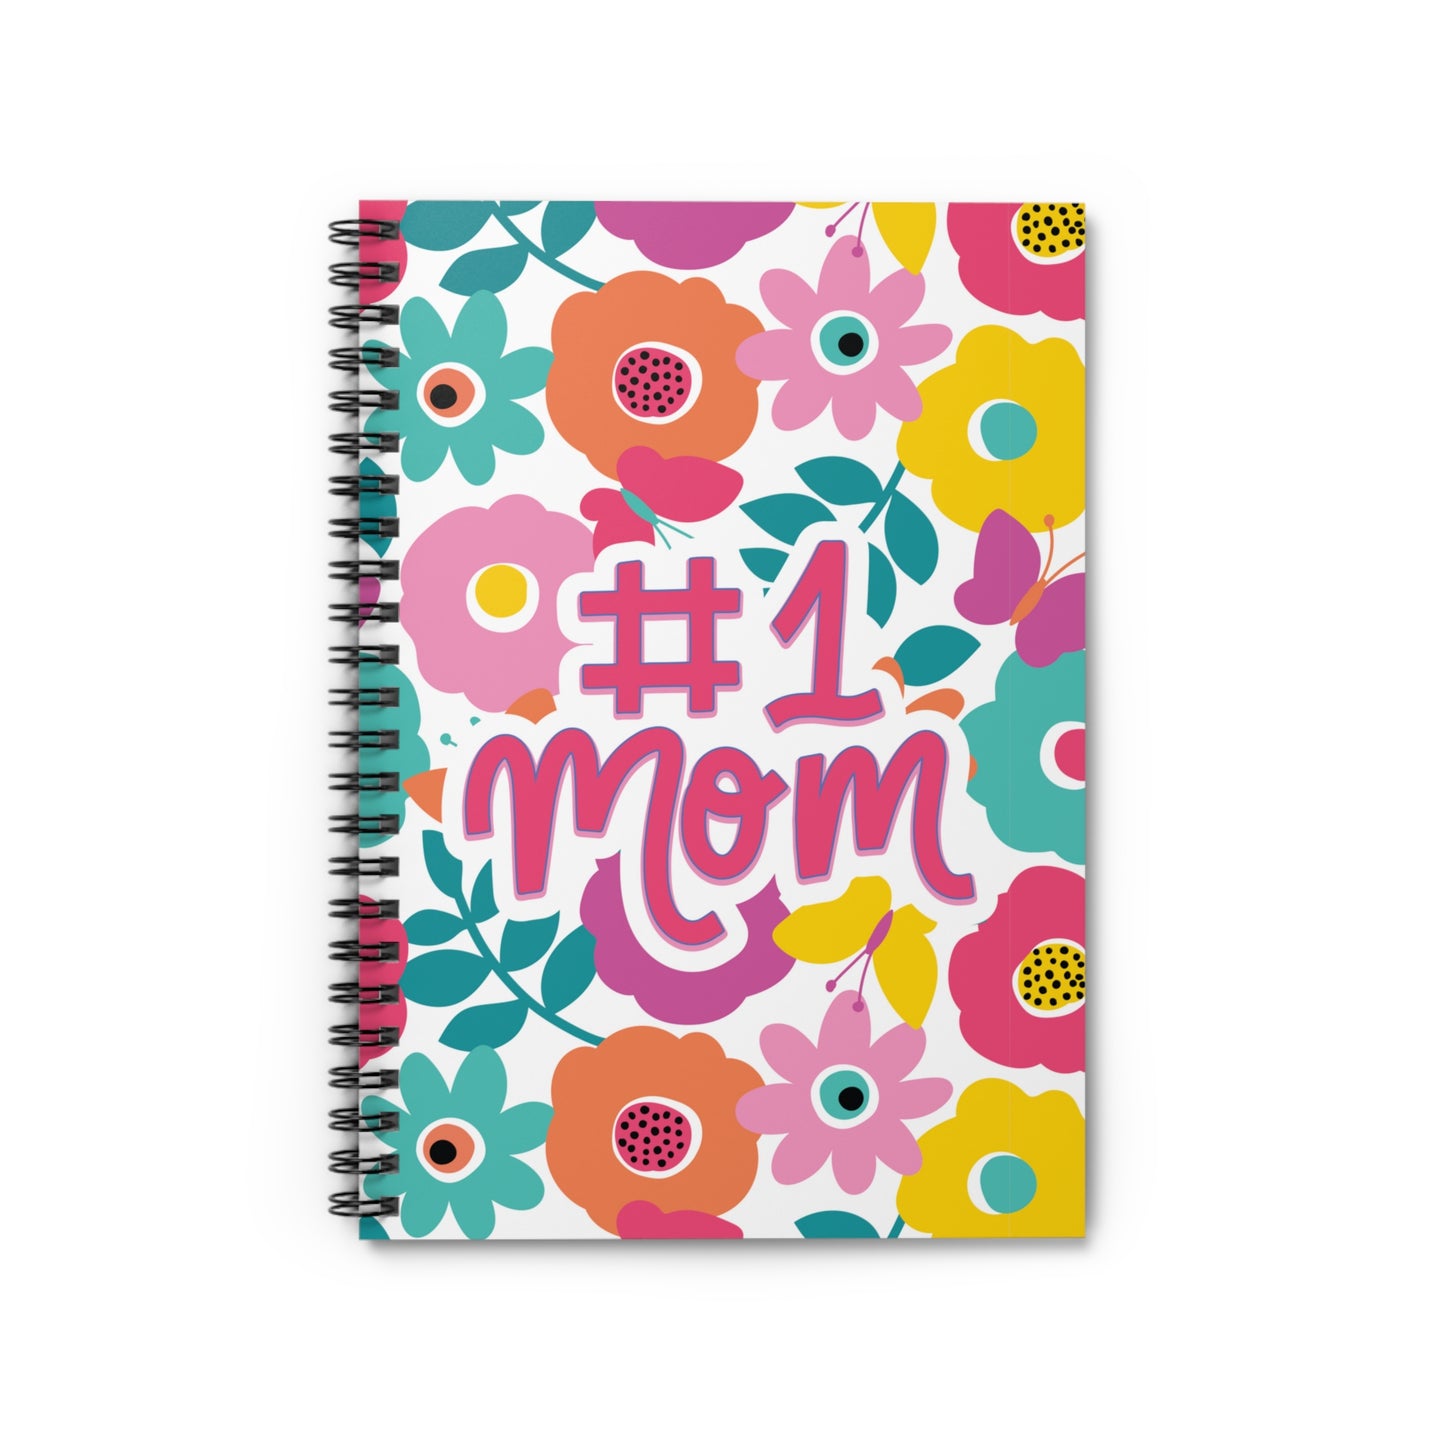 #1 Mom Spiral Notebook - Ruled Line, Mothers Day Gift